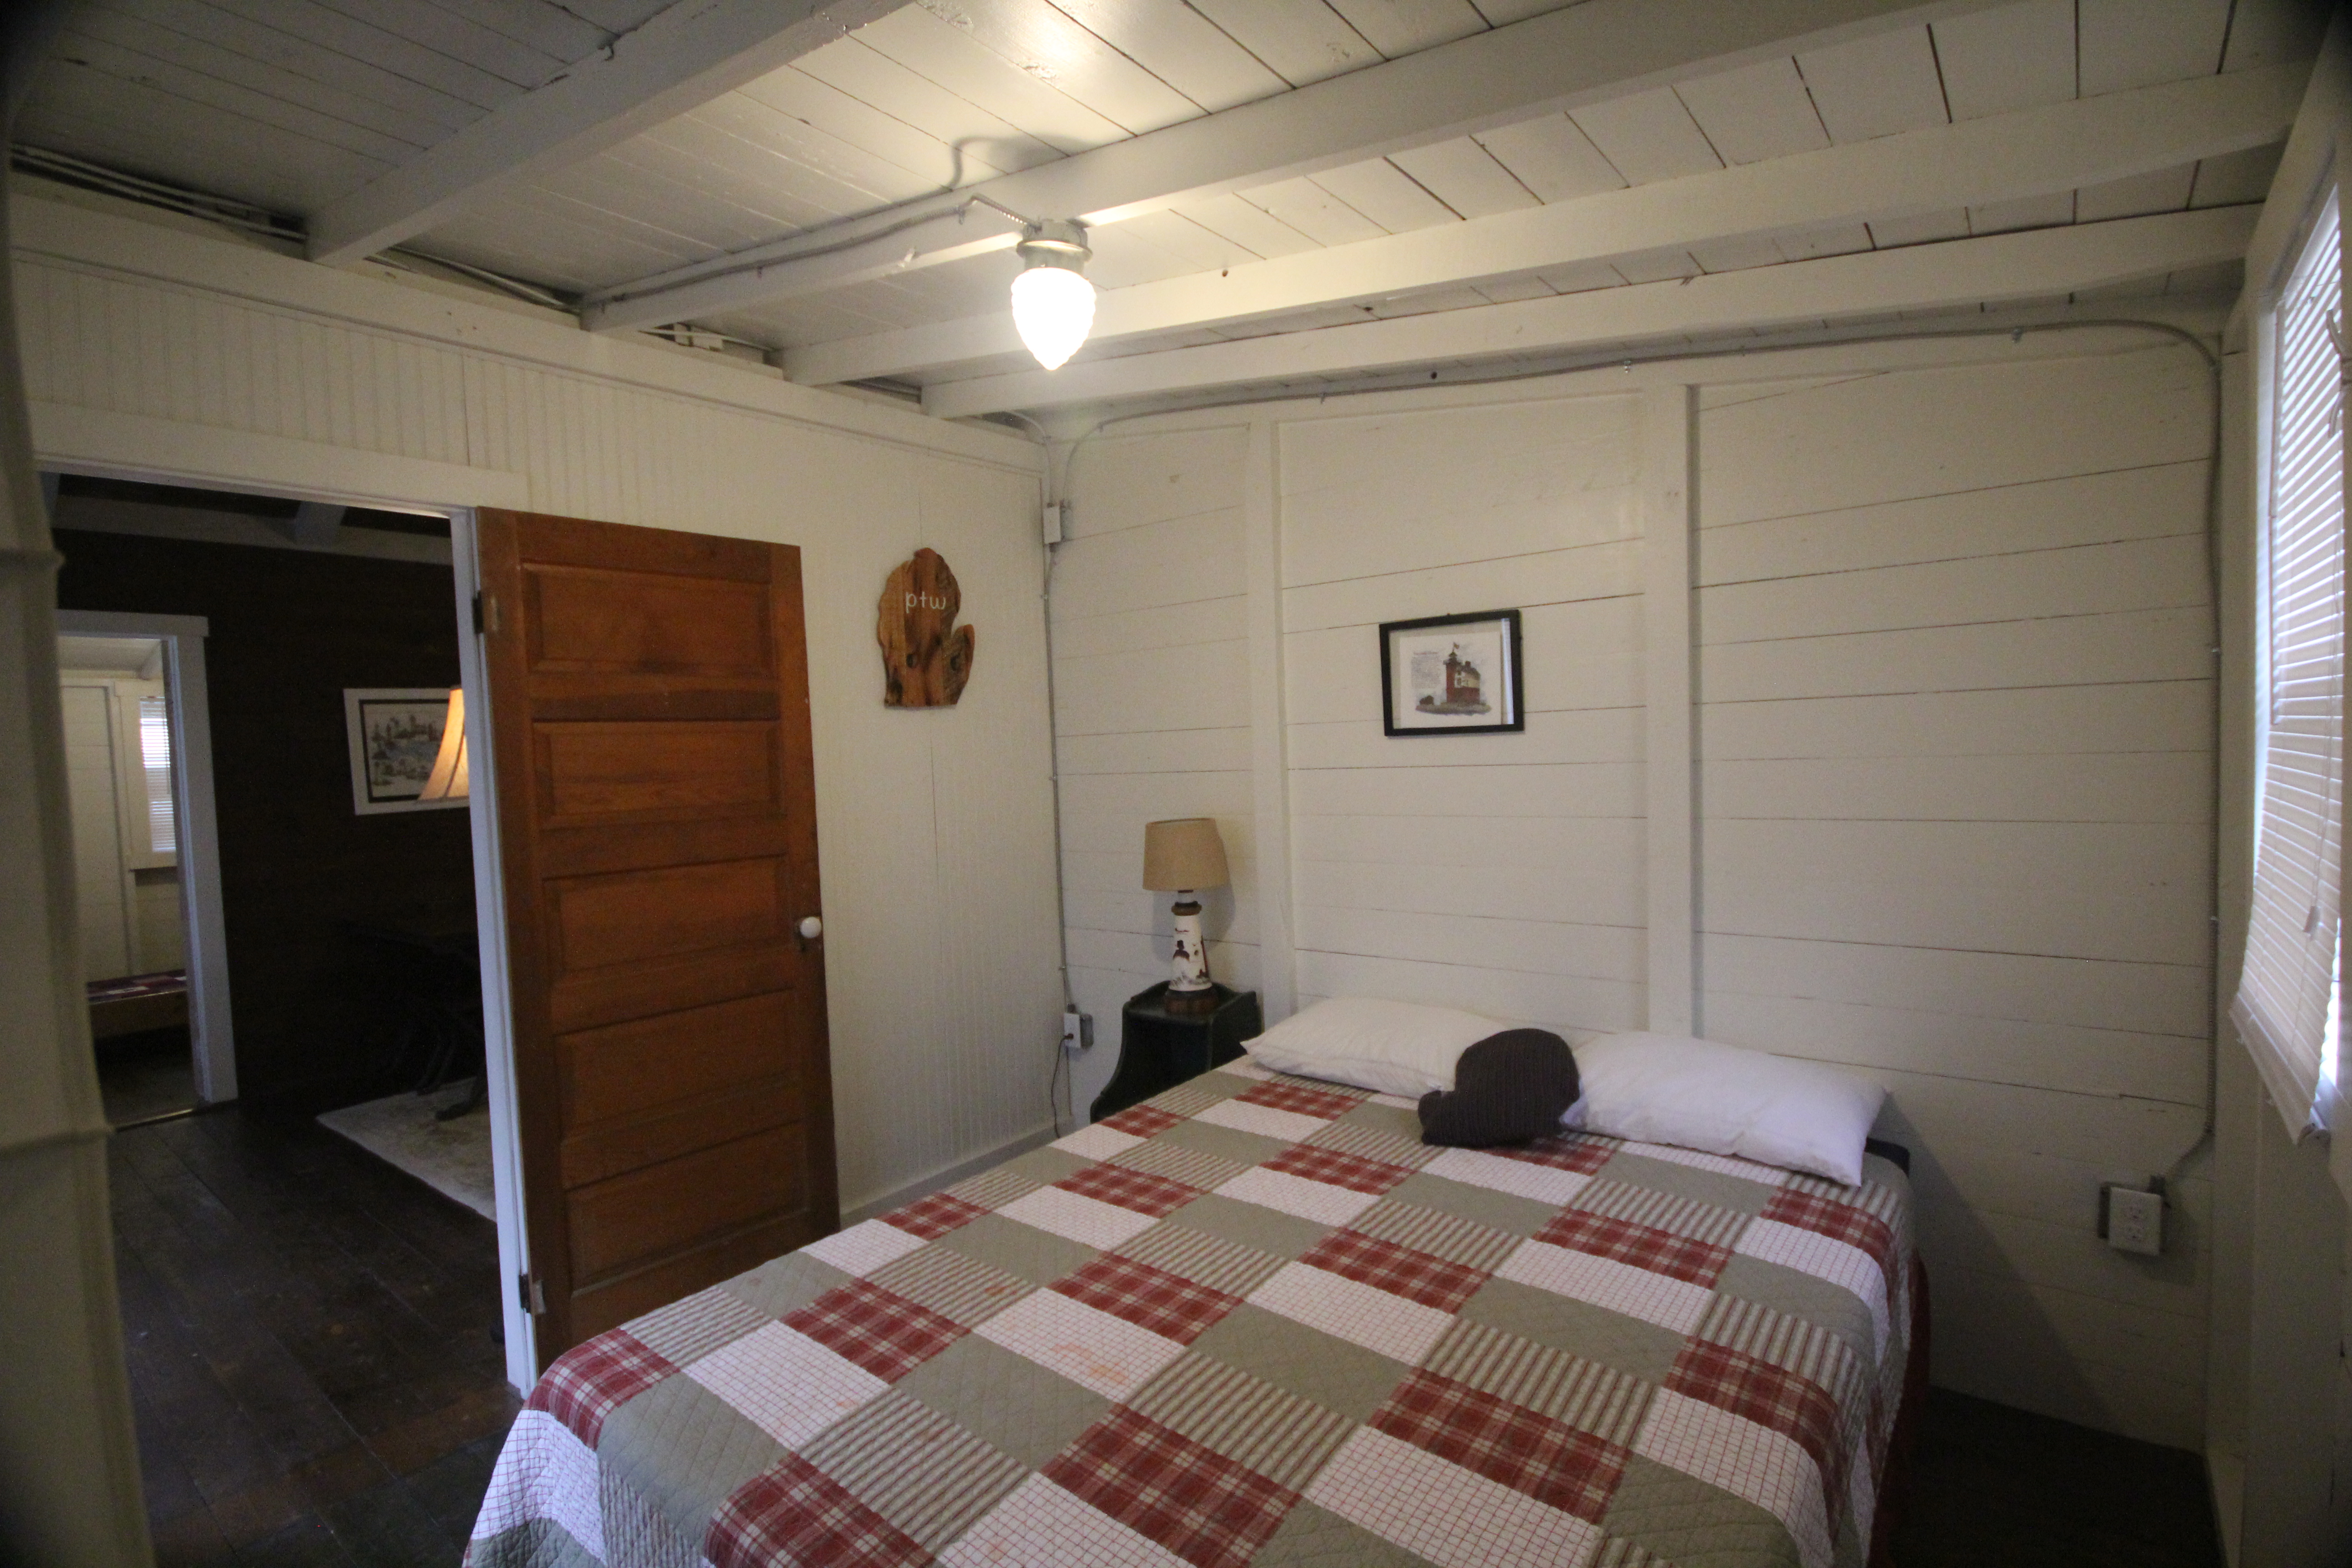 3 Bedroom Cottage Rental Whispering Surf Campground at Bass Lake Pentwater Michigan